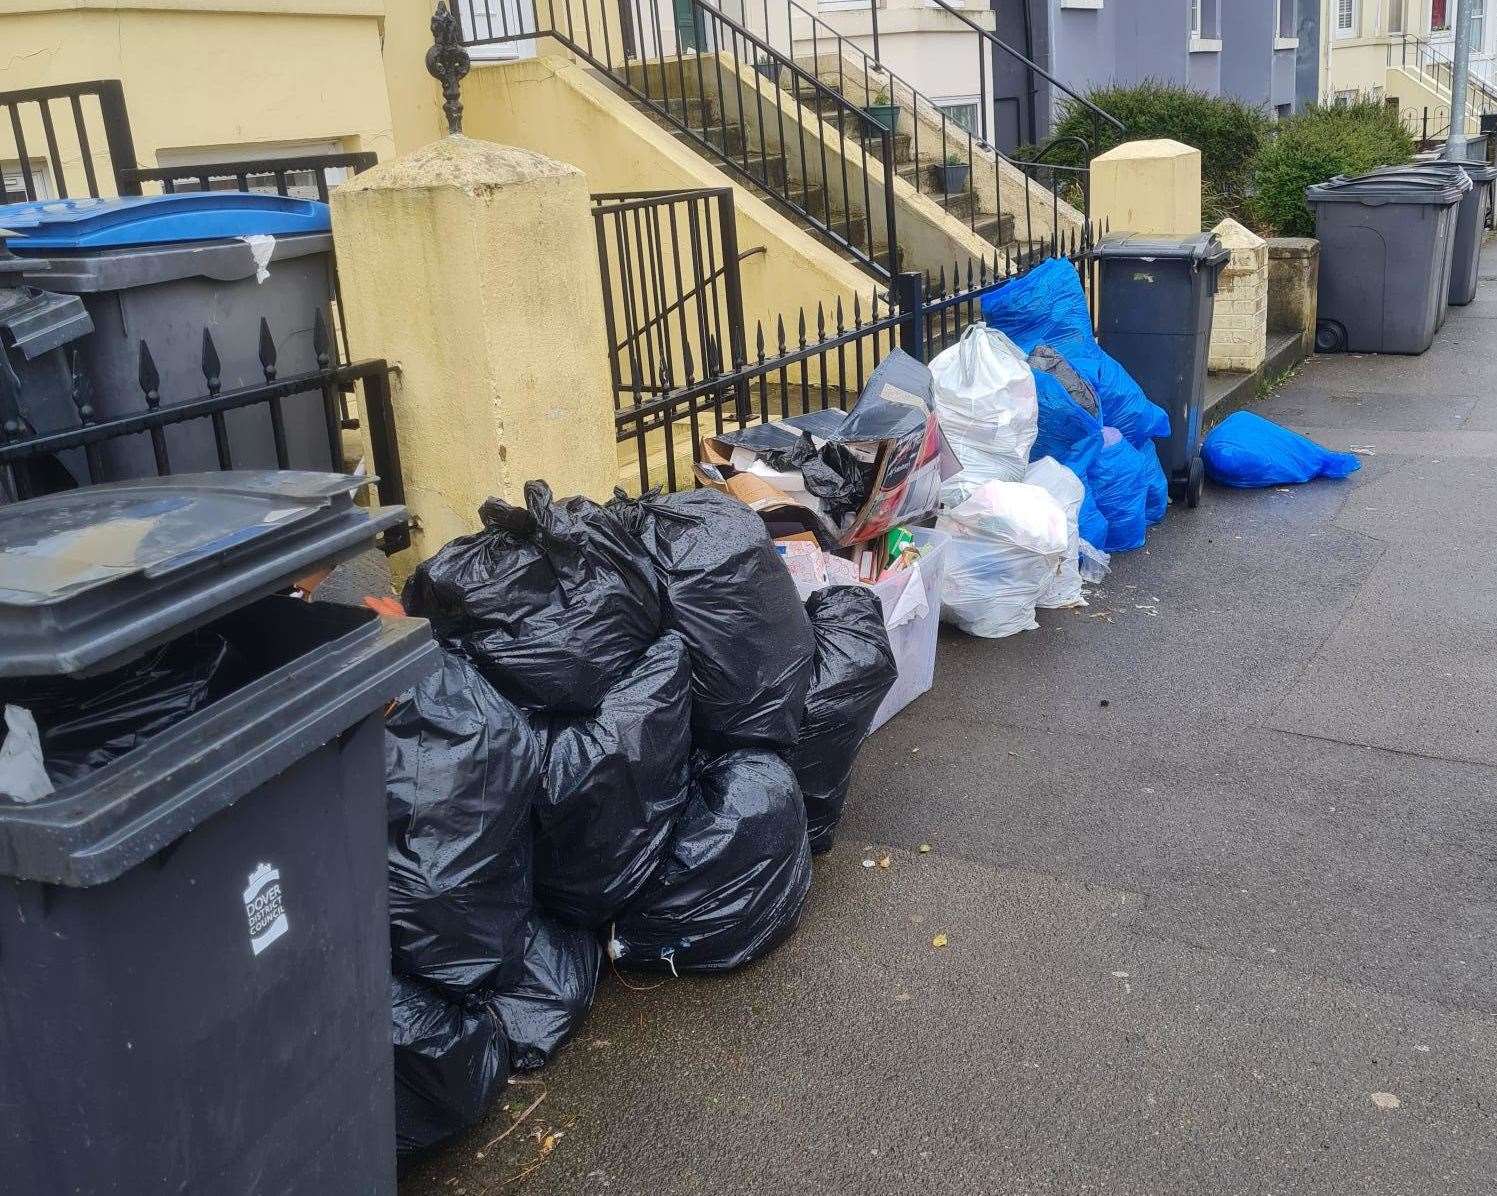 The 26 bags of uncollected rubbish. Picture: Lisa Coward